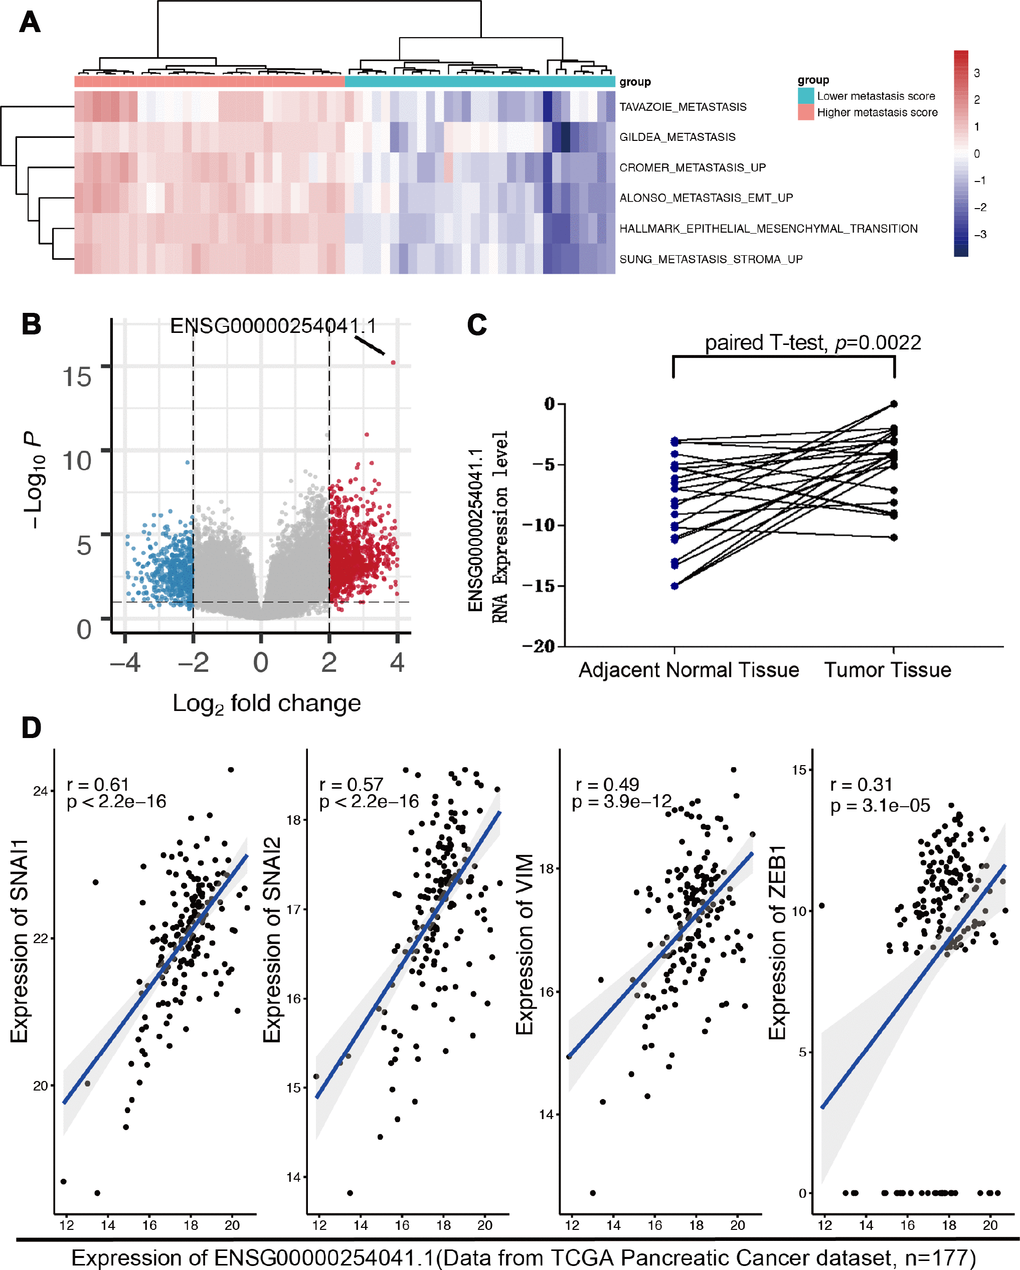 The expression of ENSG00000254041.1 in PC and adjacent normal tissues. (A) Reanalyzing the RNA-seq data from TCGA PC patients with either high or low epithelial-mesenchymal transition (EMT) signature scores. (B) ENSG00000254041.1 was the top-ranked molecule of the different LncRNA between the two groups. (C) Expression levels of ENSG00000254041.1 were performed in 24 paired tumor and matched normal tissue samples. (D) A positive correlation between ENSG00000254041.1 and individual gene transcripts related to EMT.